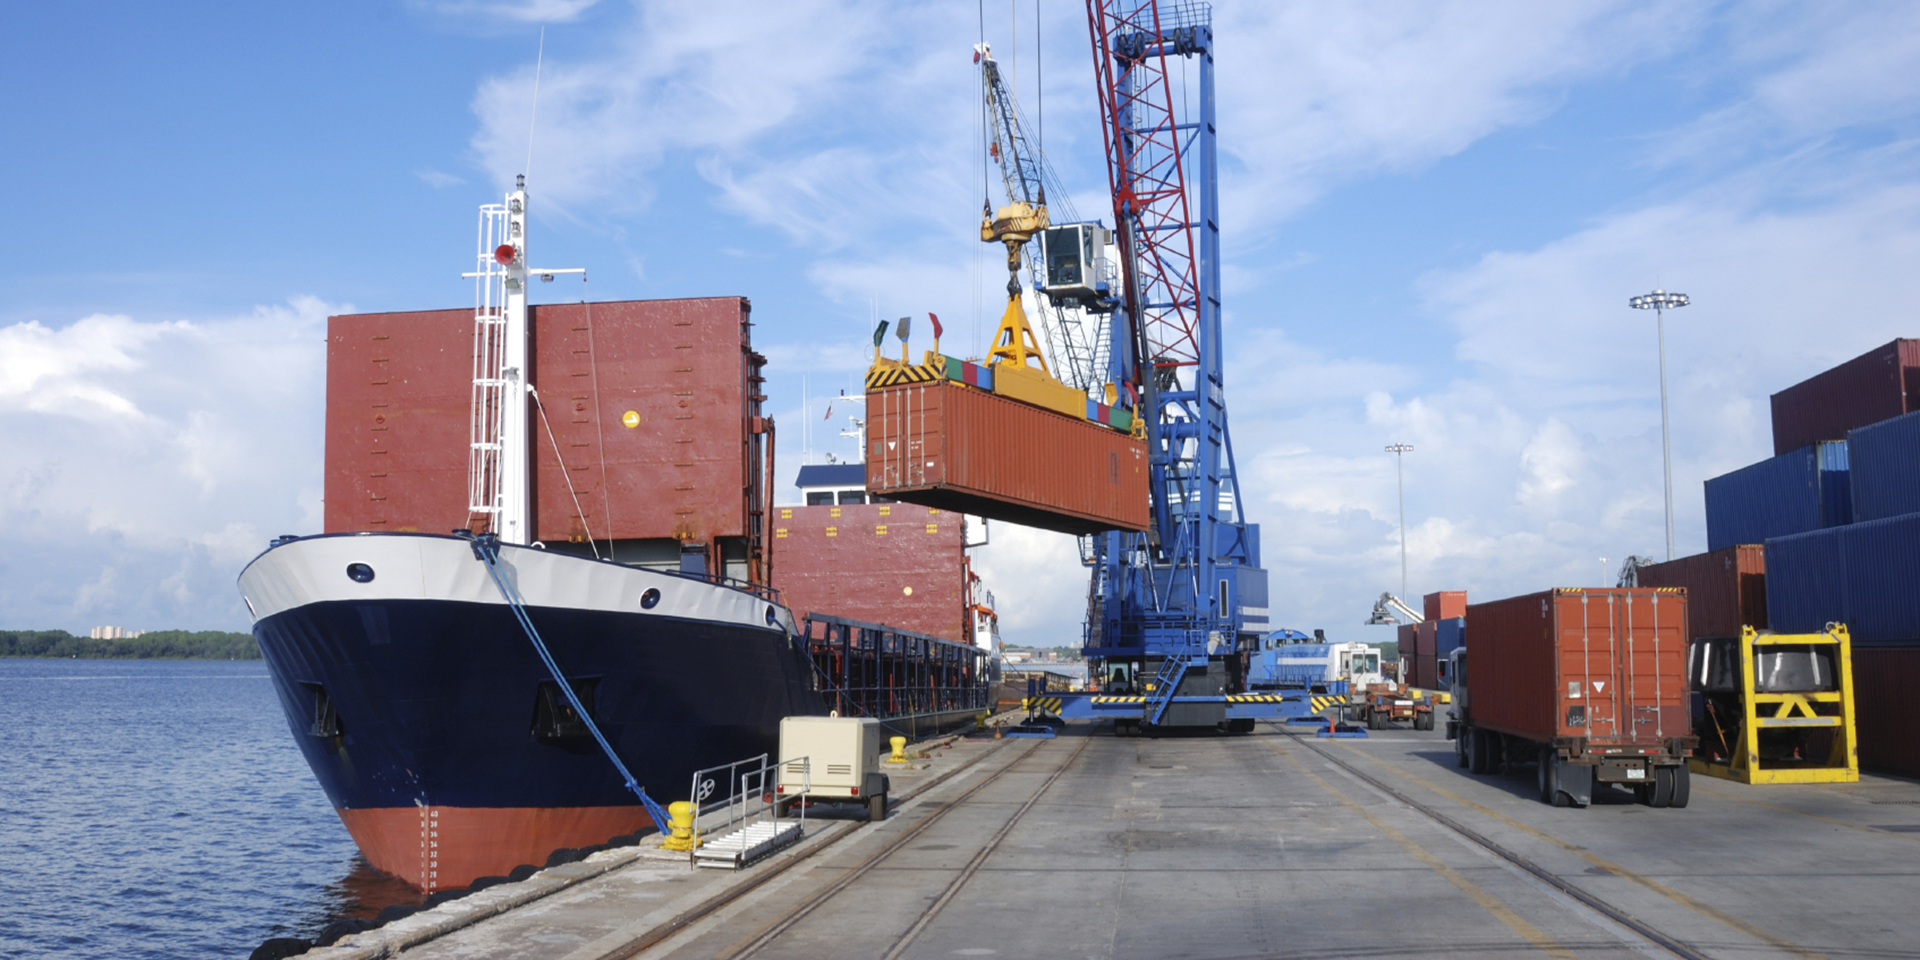 Image of a dock with a large shipping container being loaded onto a trading vessel by a blue crane.